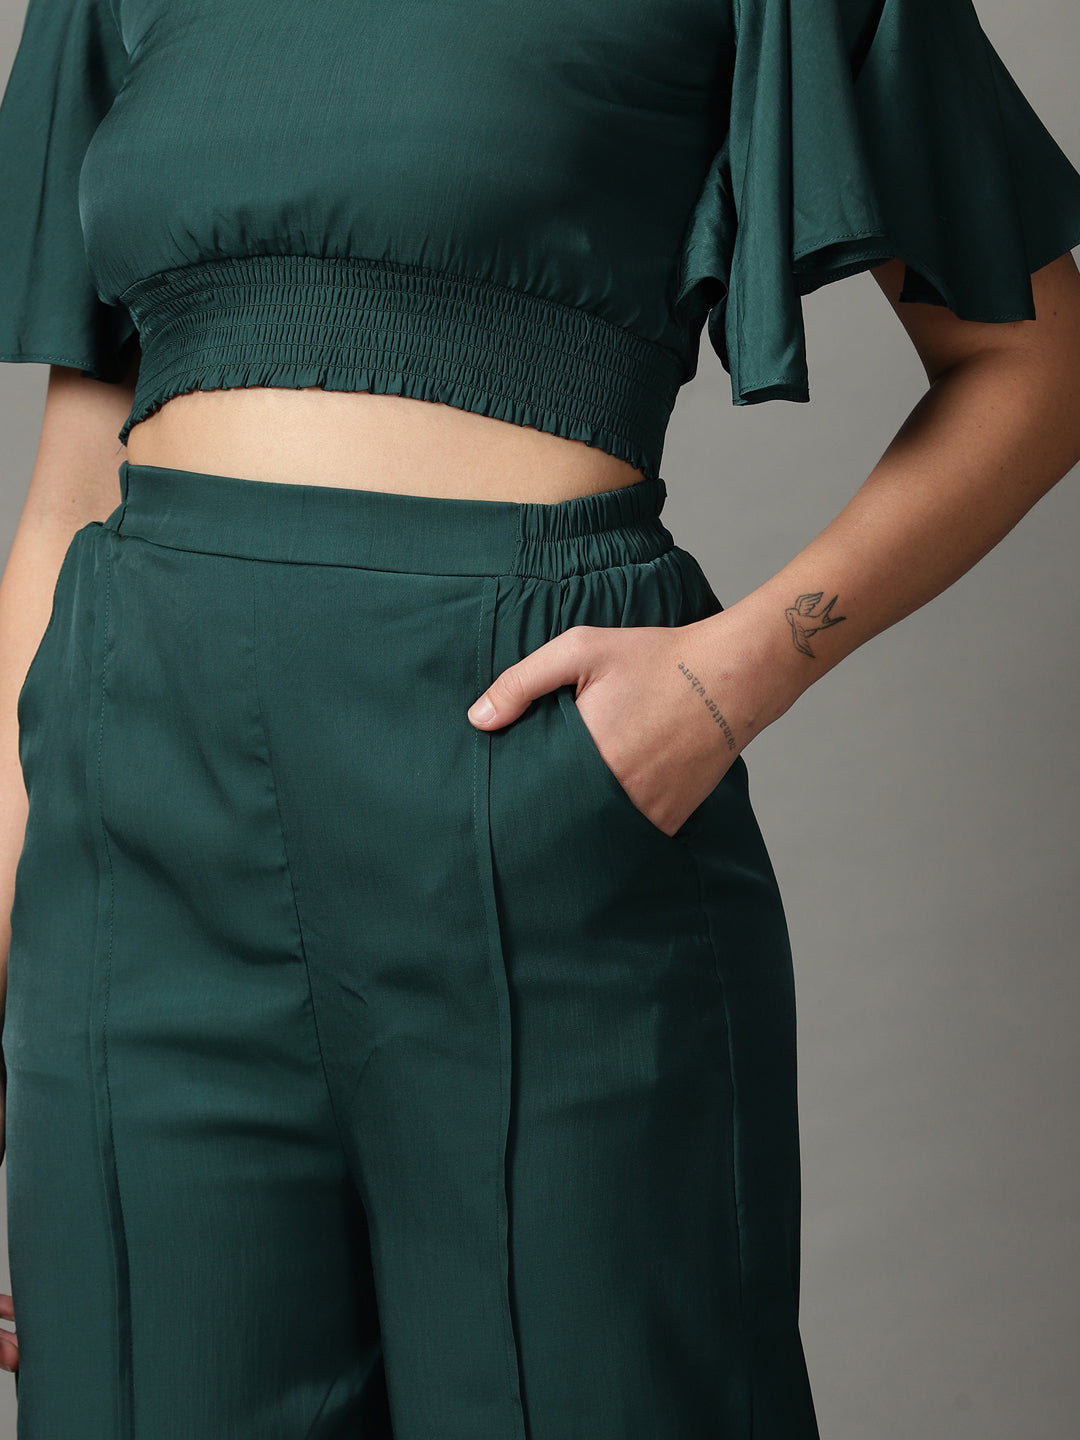 Women's Green Solid Co-Ords